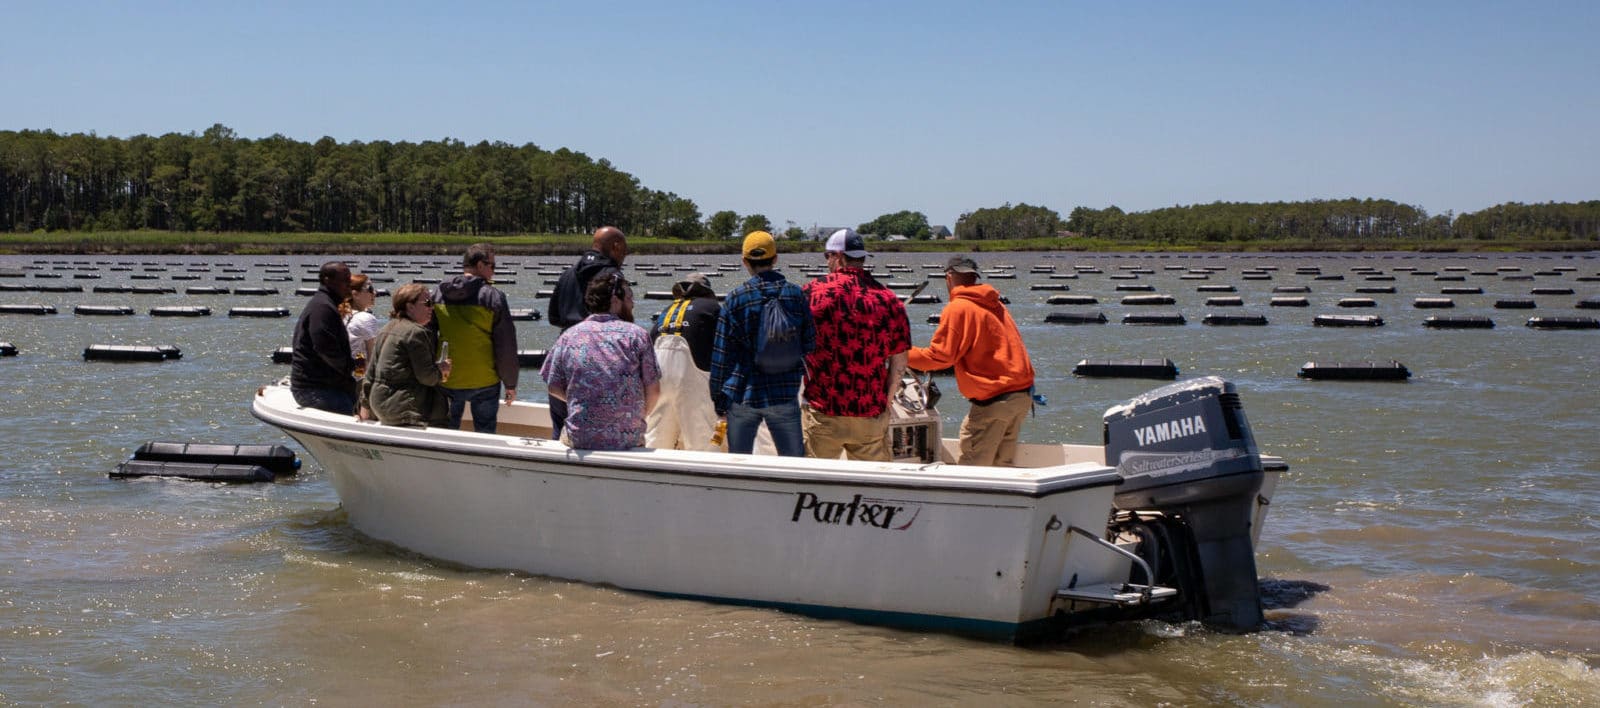 Congressional Seafood Chef Tour at Hoopers Island Oyster Co. Farm